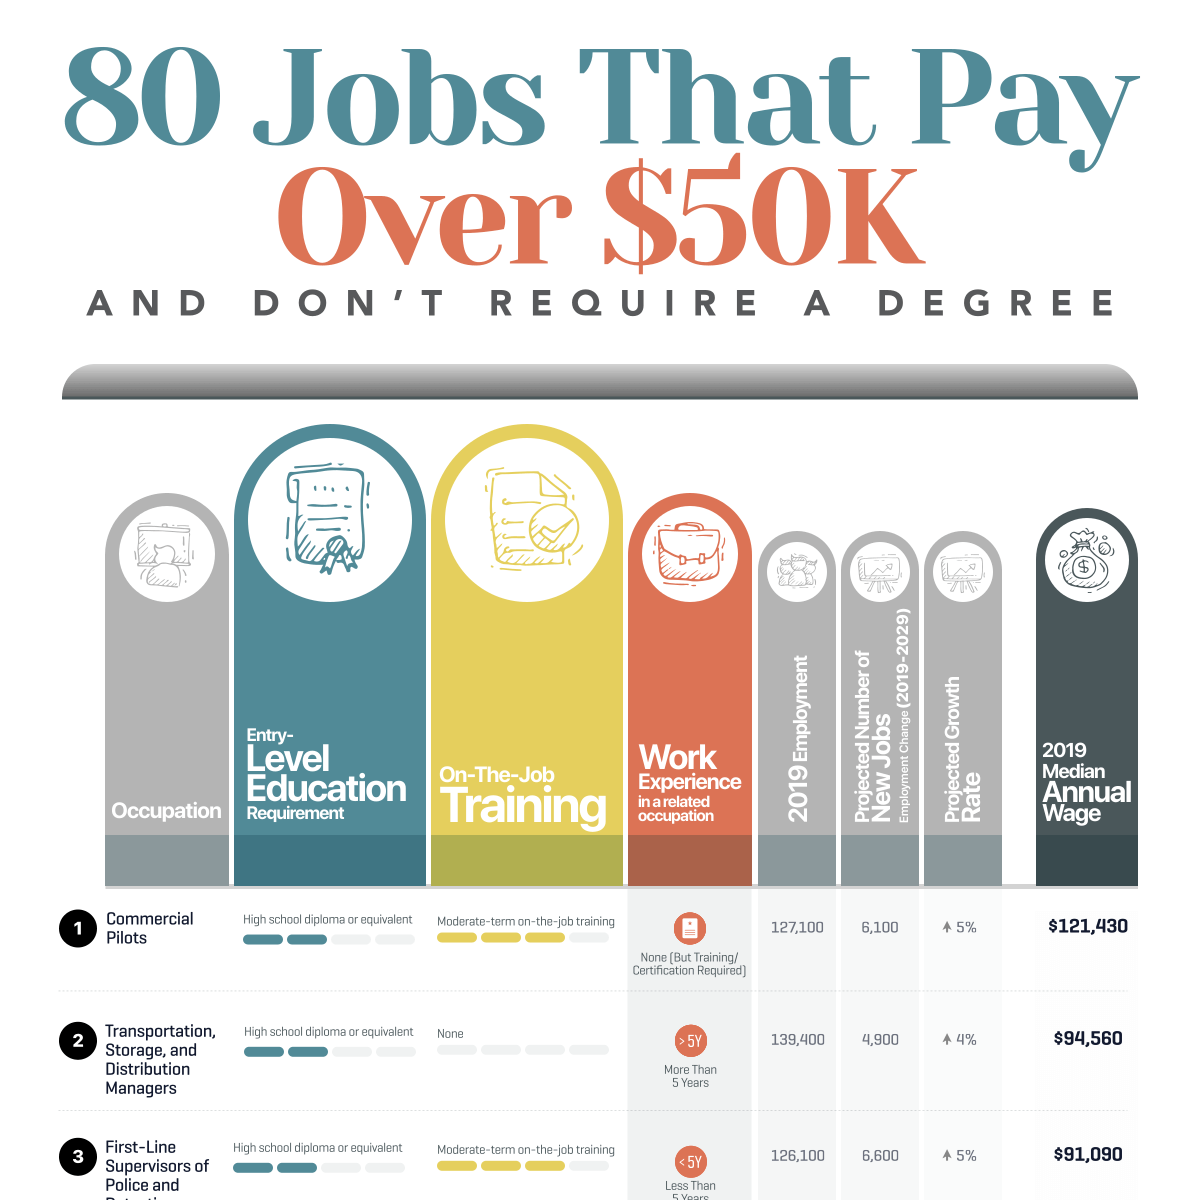 Jobs that pay over $50K